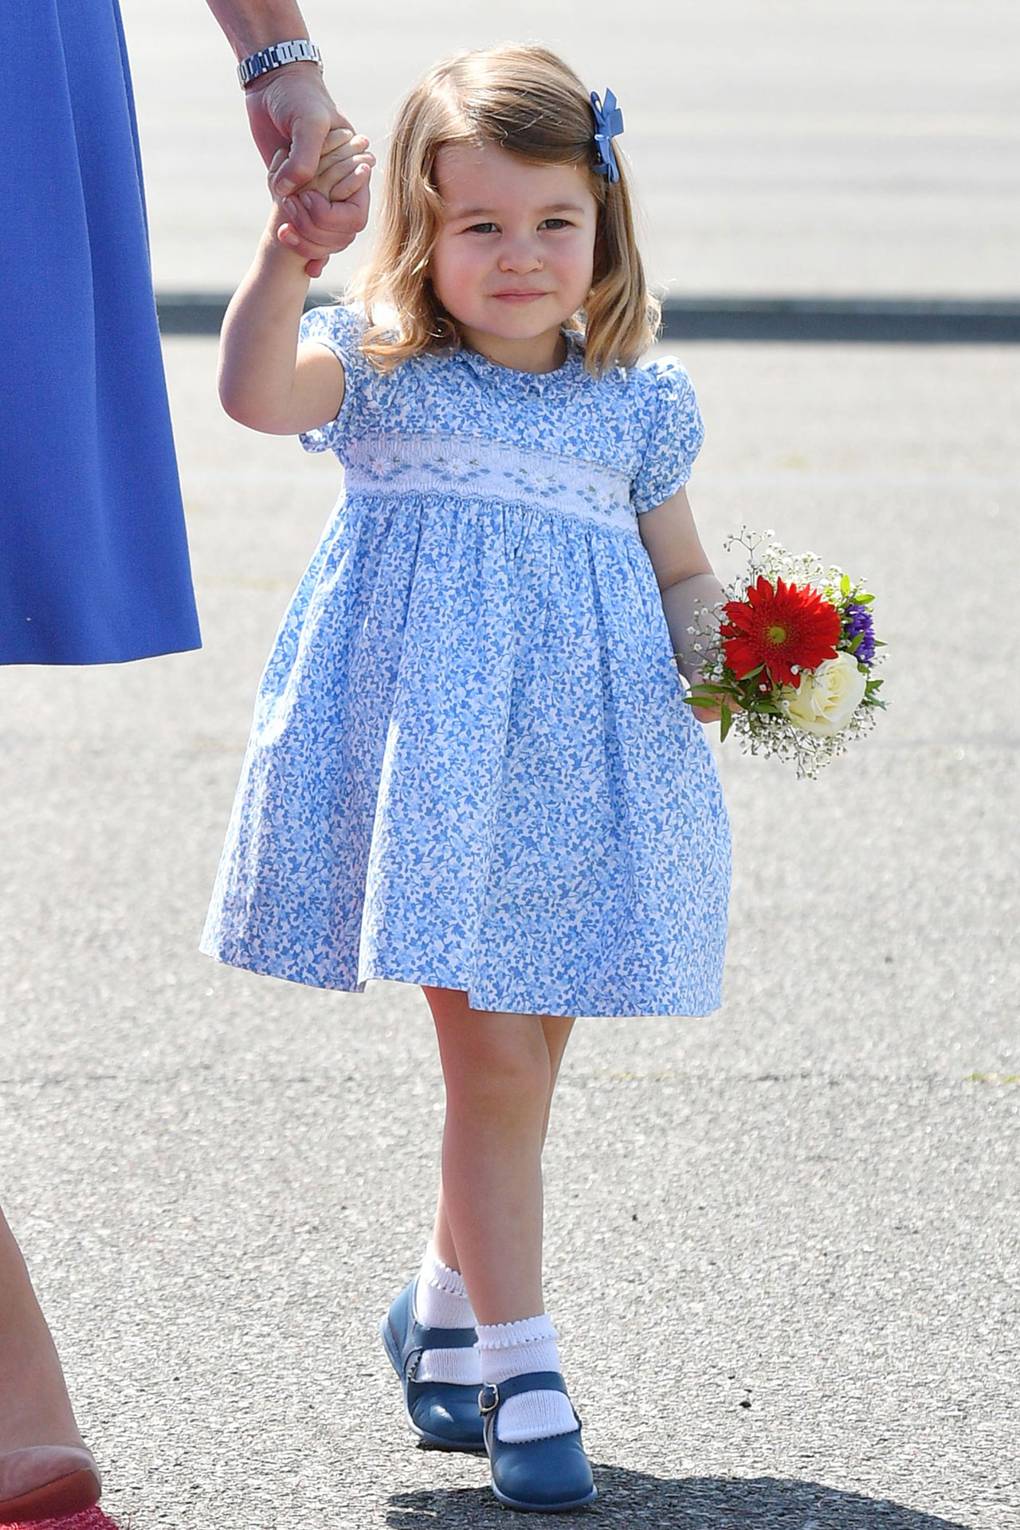 Princess Charlotte Cute Pictures: From Then & Now | Glamour UK